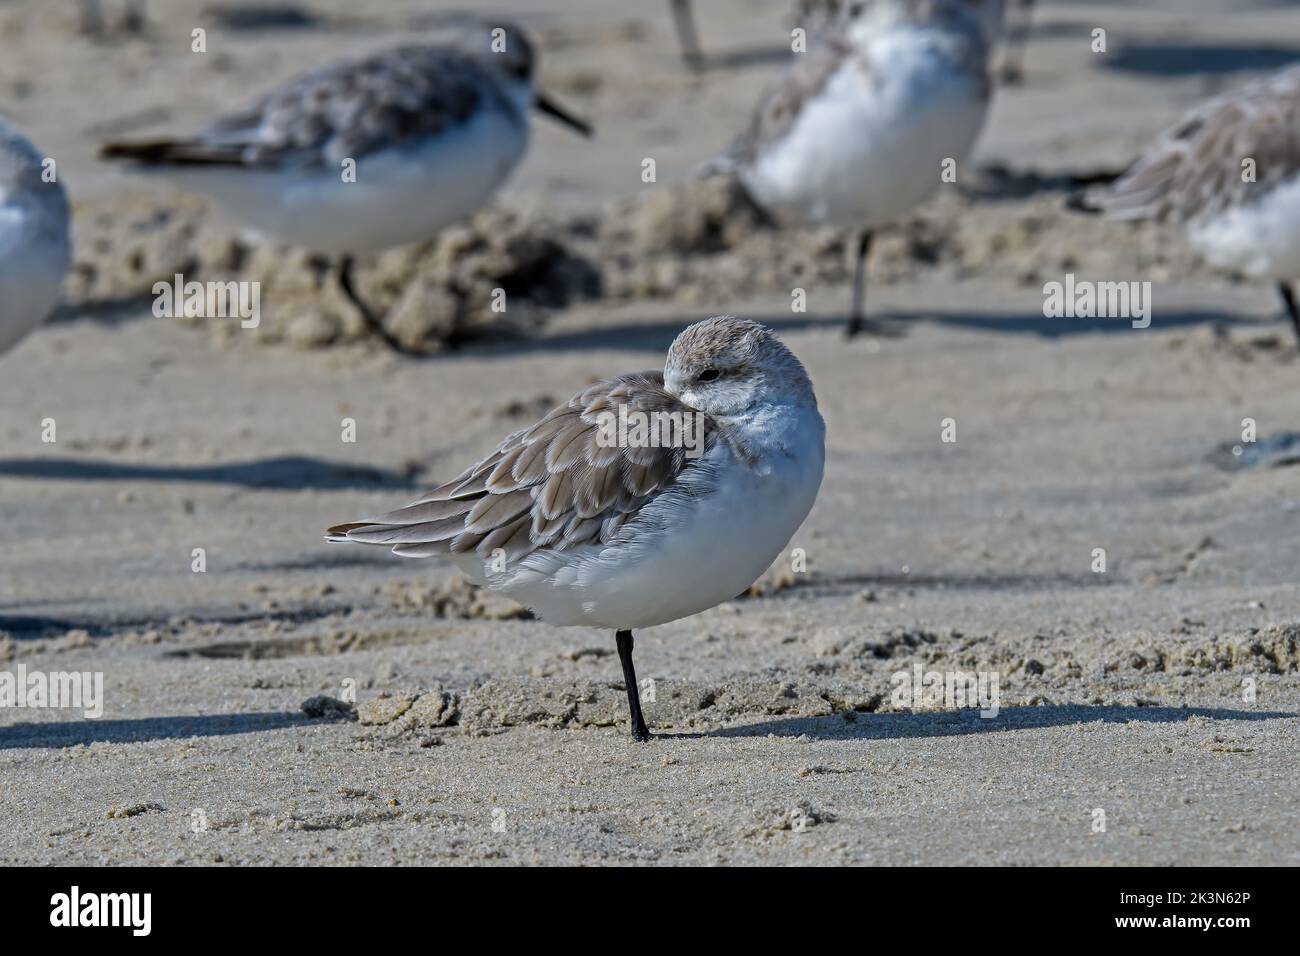 Sanderling resting on the beach on the Atlantic Ocean coast. It is a small wading bird found almost exclusively on sandy beaches. Stock Photo